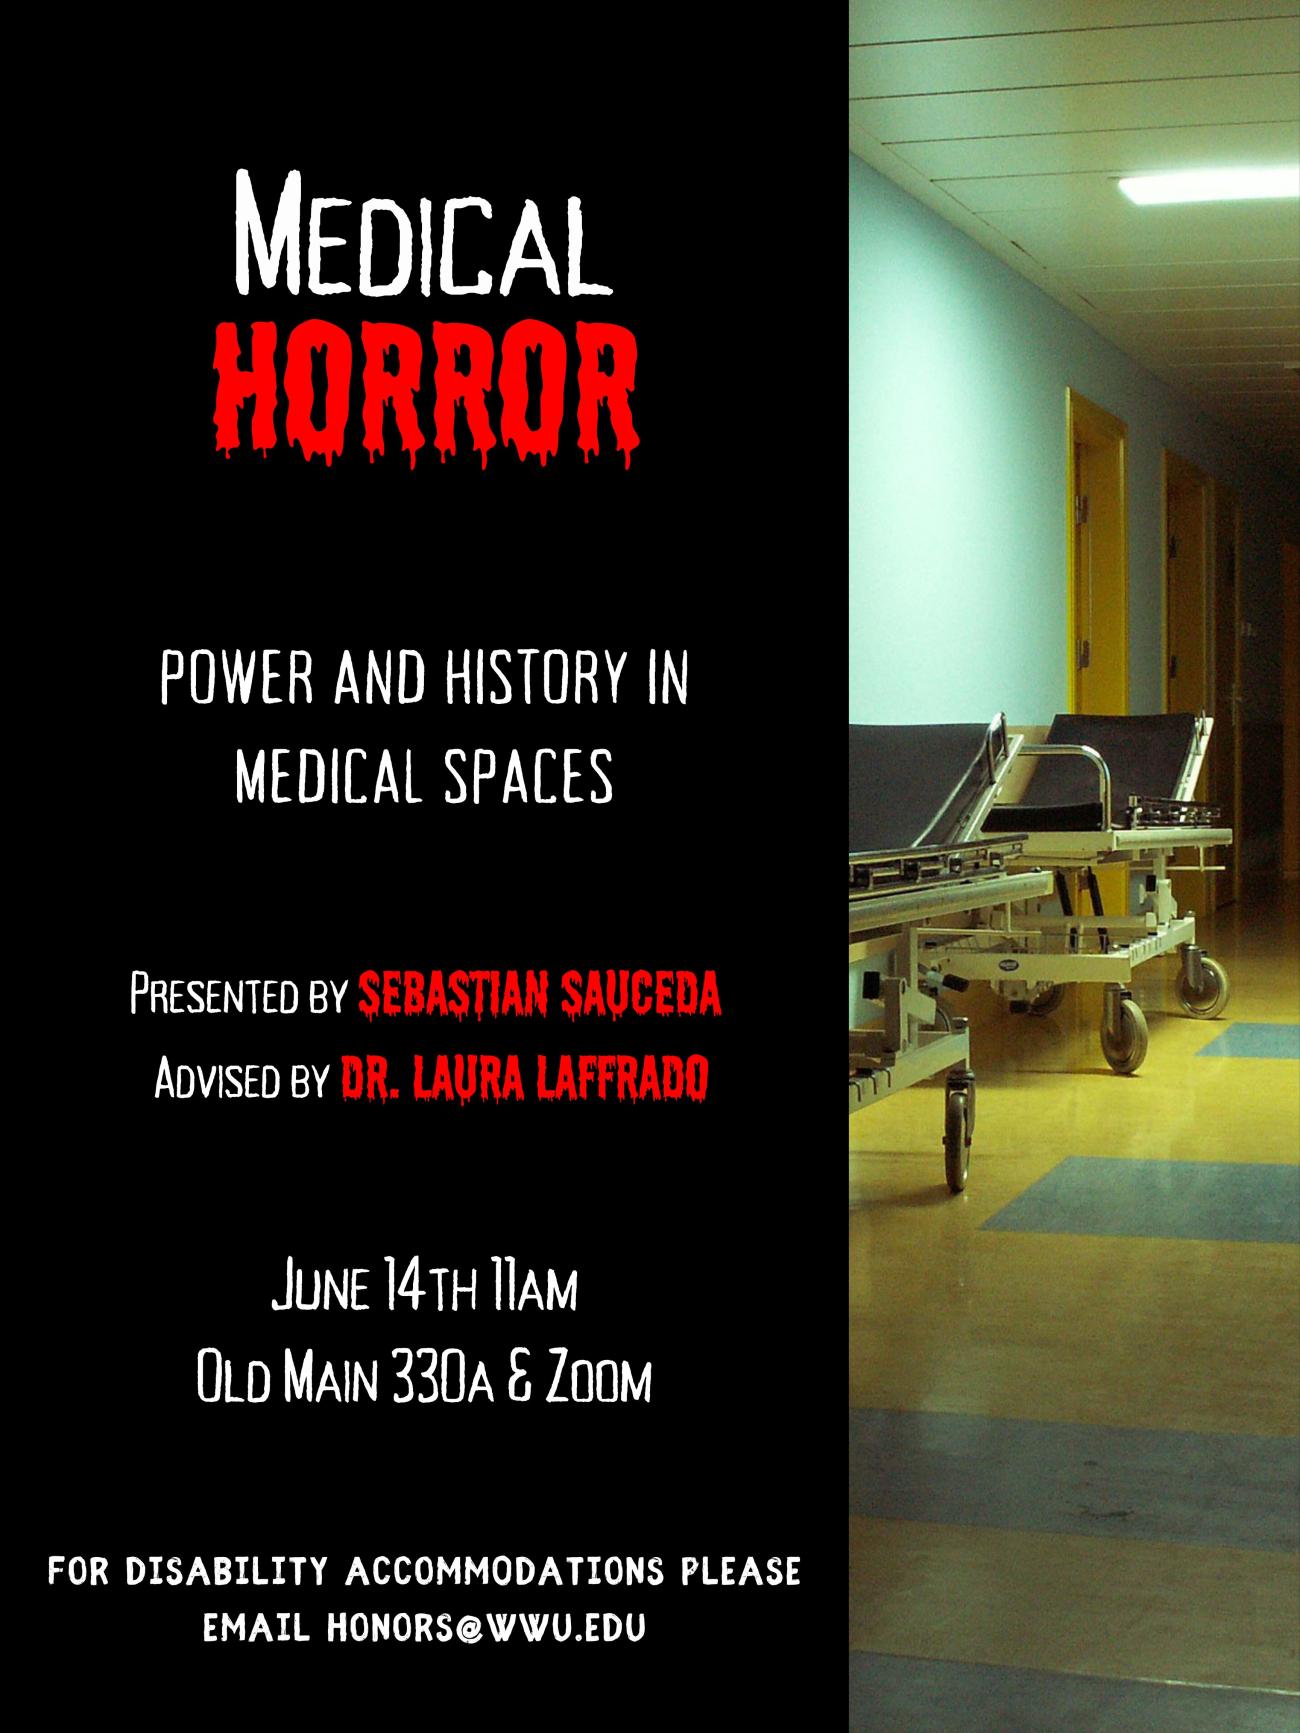 Black background to the left of an image of an eerie, poorly light hospital hallway. In the image, hospital beds line the wall. Text reads “Medical Horror: Power and History in Medical Spaces. Presented by Sebastian Sauceda, Advised by Dr. Laura Laffrado. June 14th 11am, Old Main 330A & Zoom. For disability accommodations please email honors@wwu.edu”